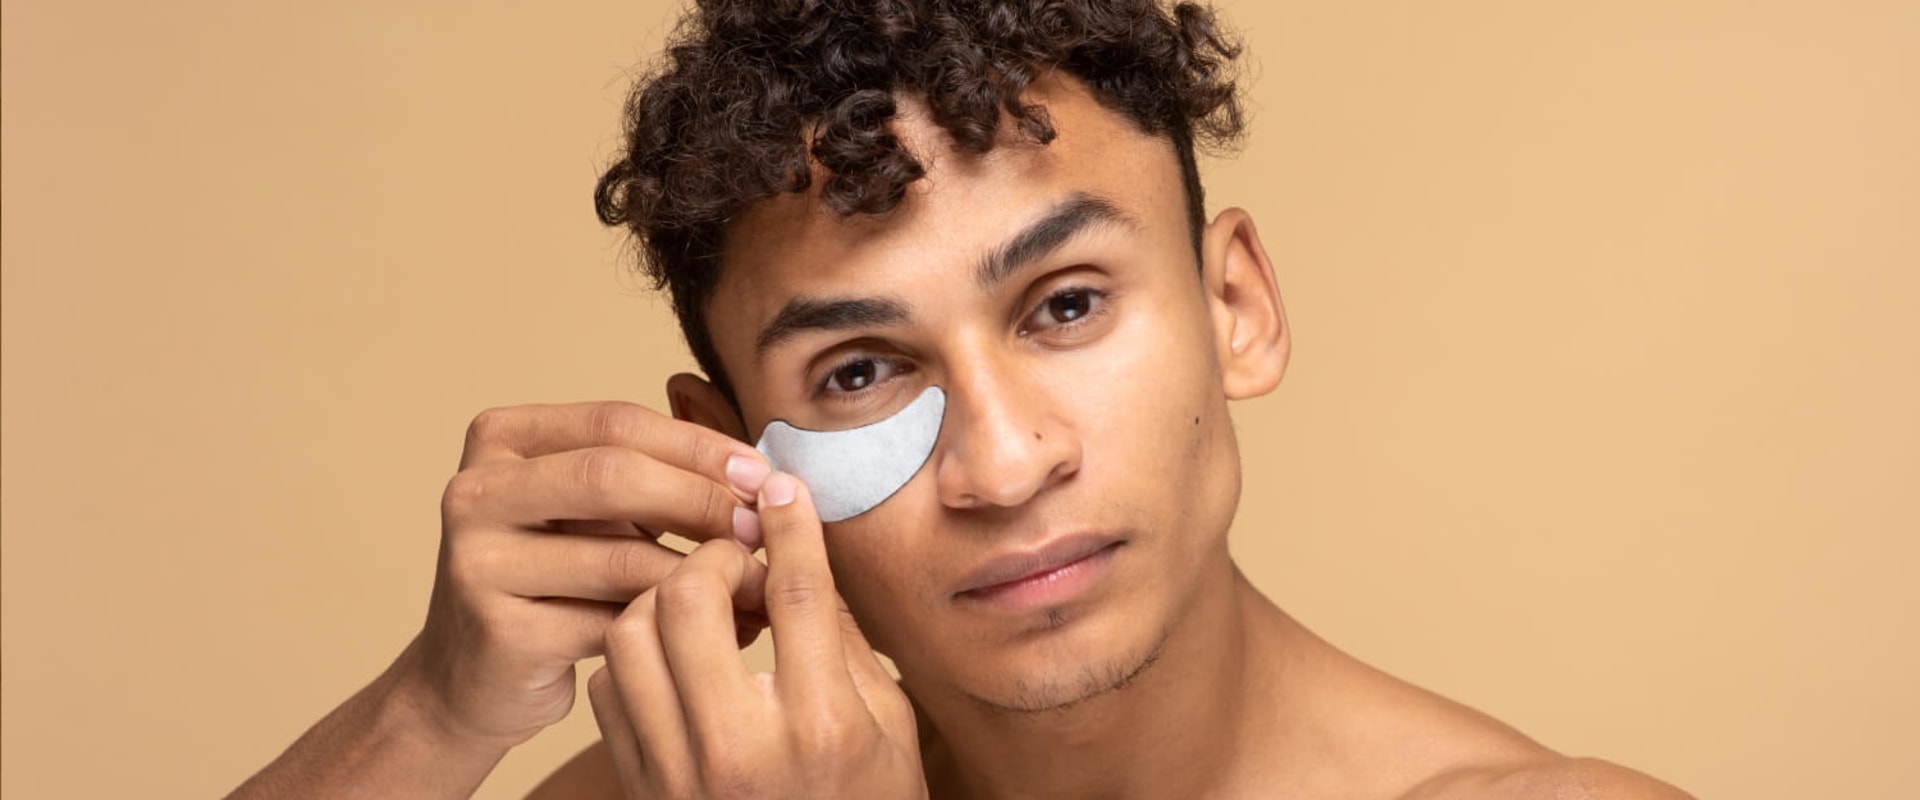 Can men use female skin care products?